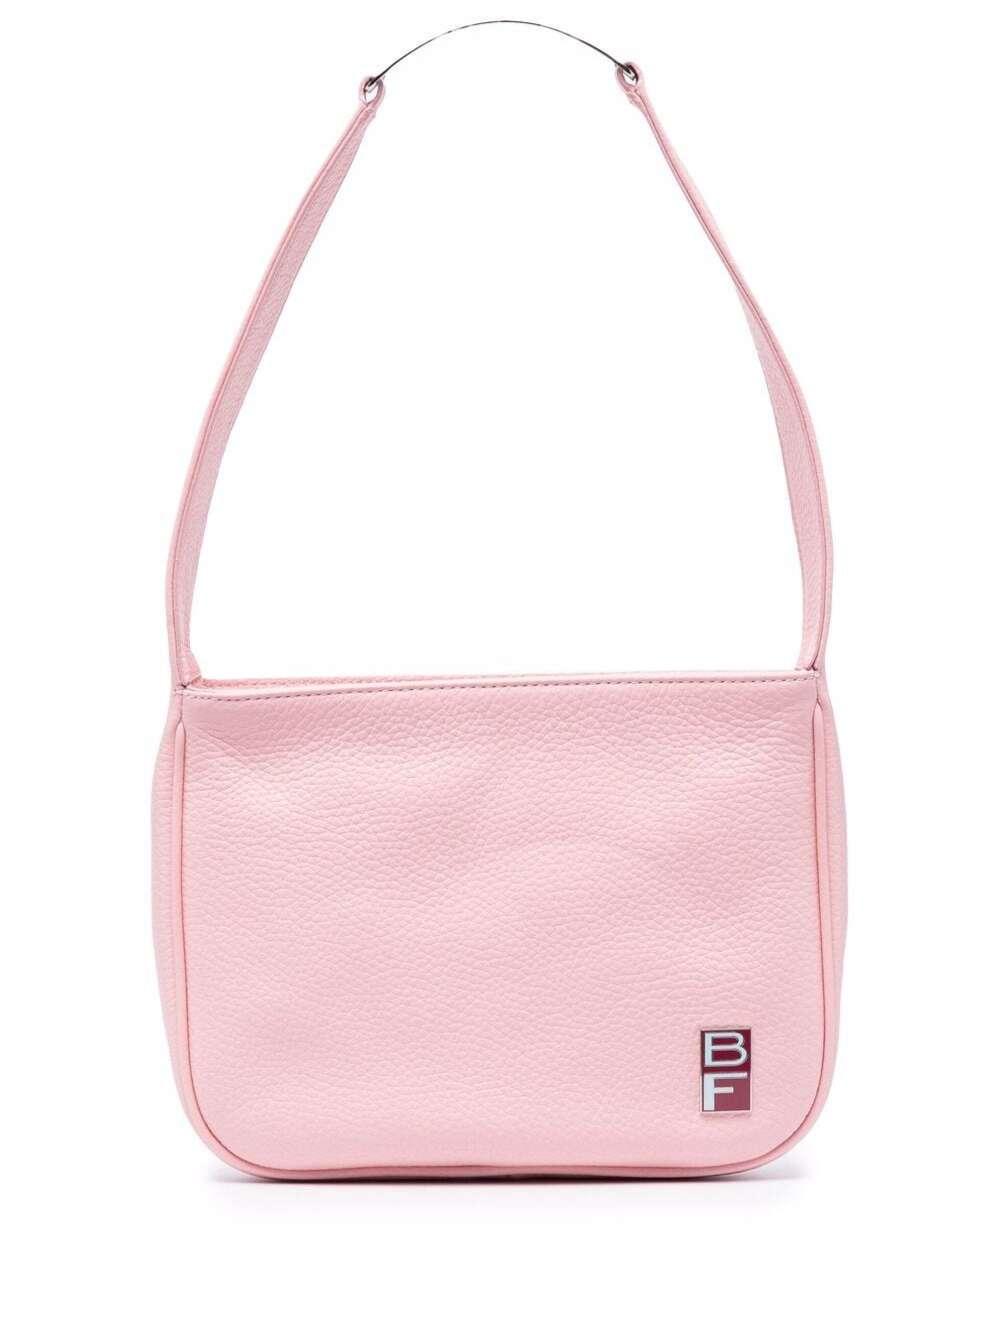 BY FAR: bag in grained leather - Pink